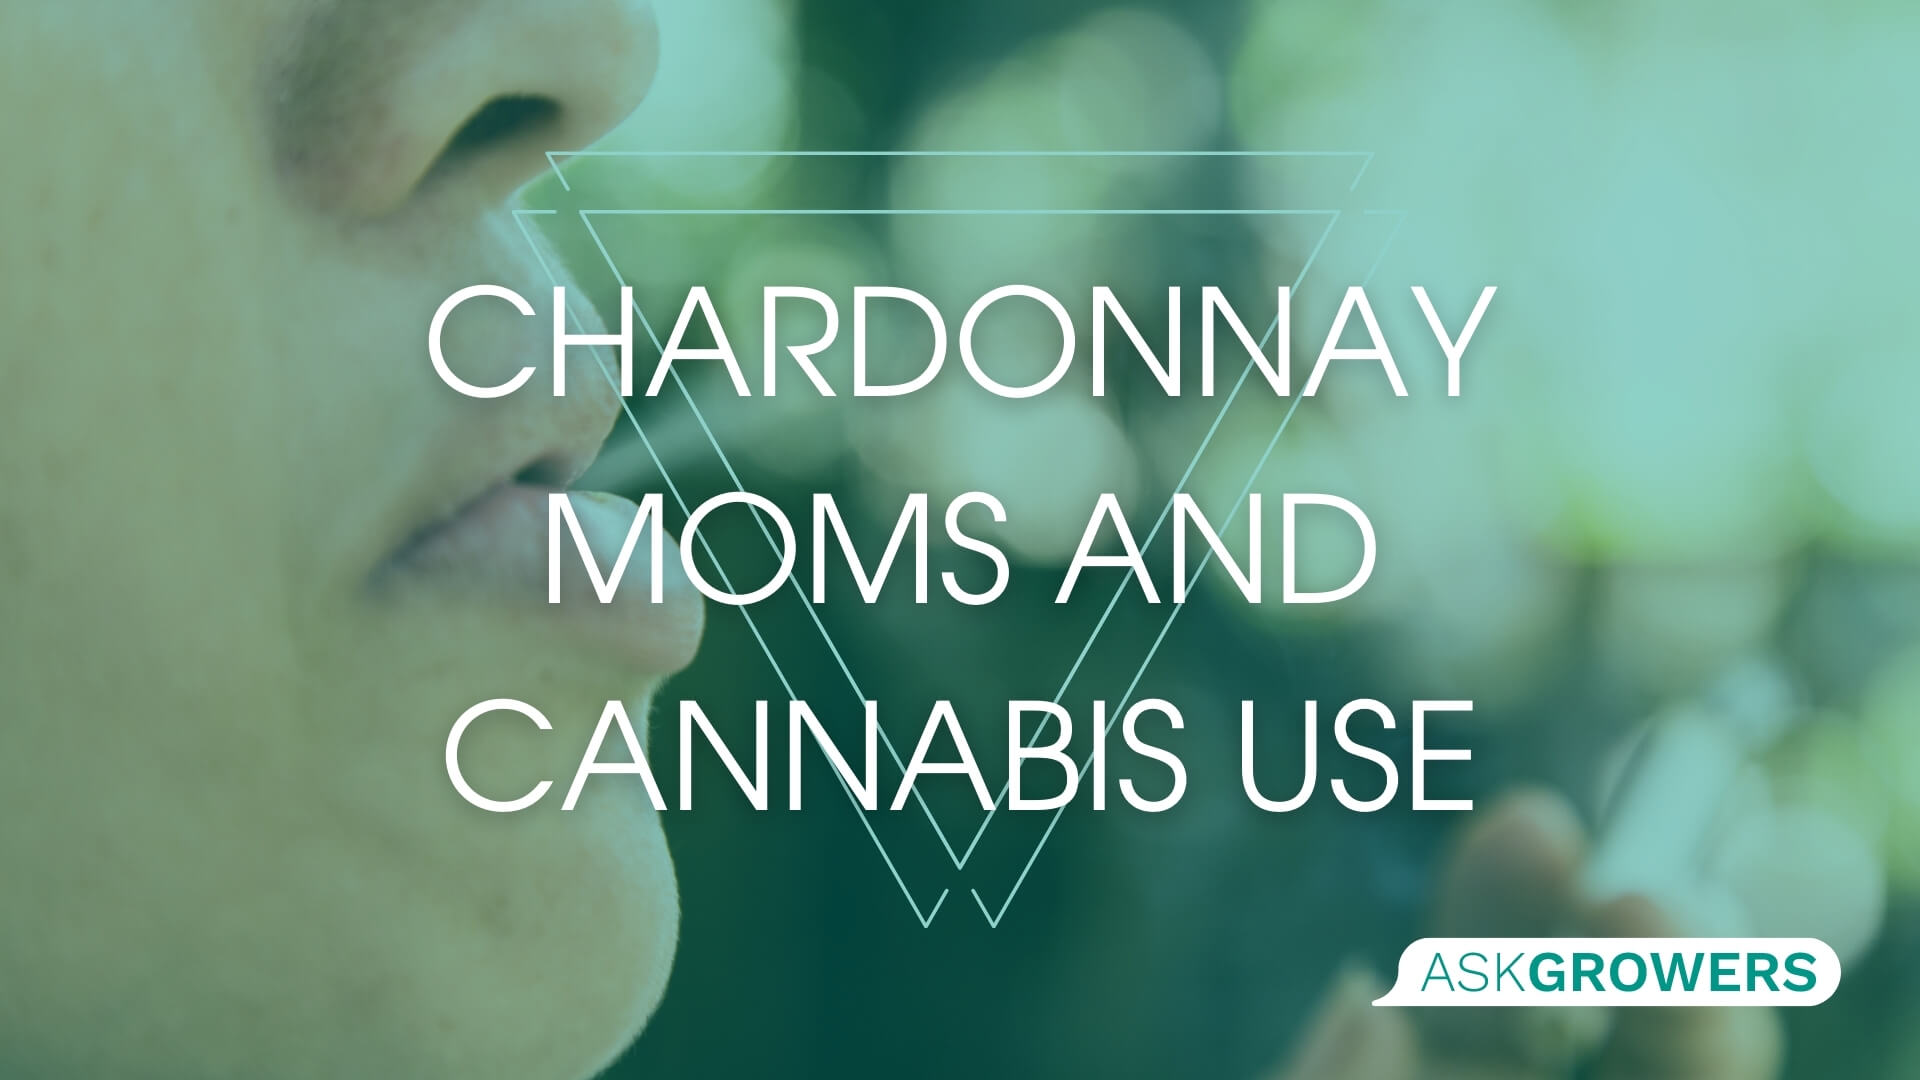 Moms and Cannabis - How Chardonnay Moms Are Moving Towards Consuming Cannabis